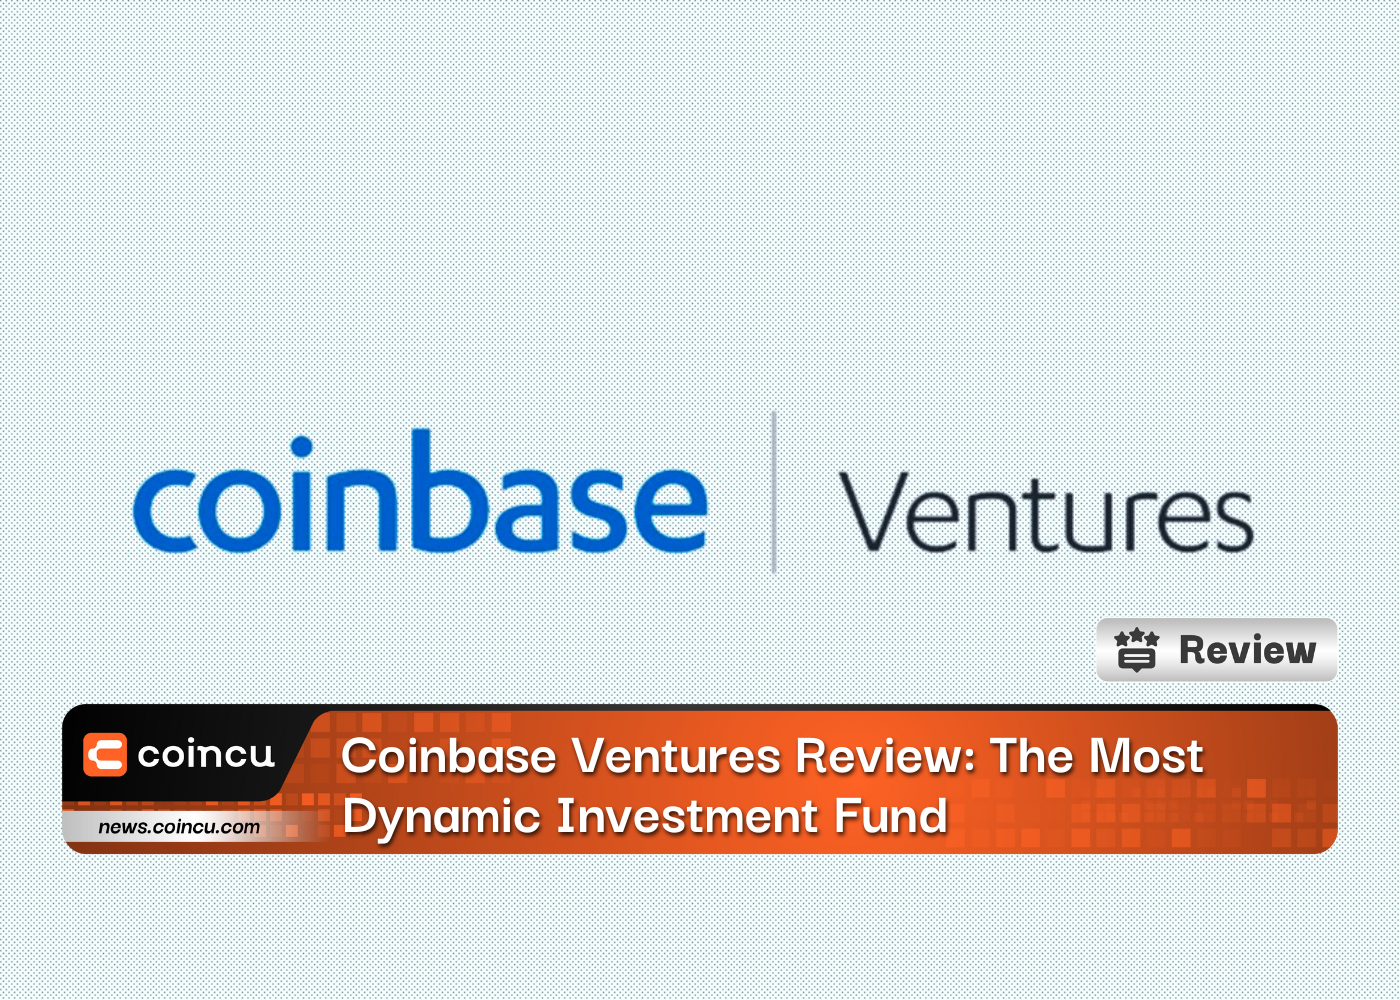 Coinbase Ventures Review: The Most Dynamic Investment Fund